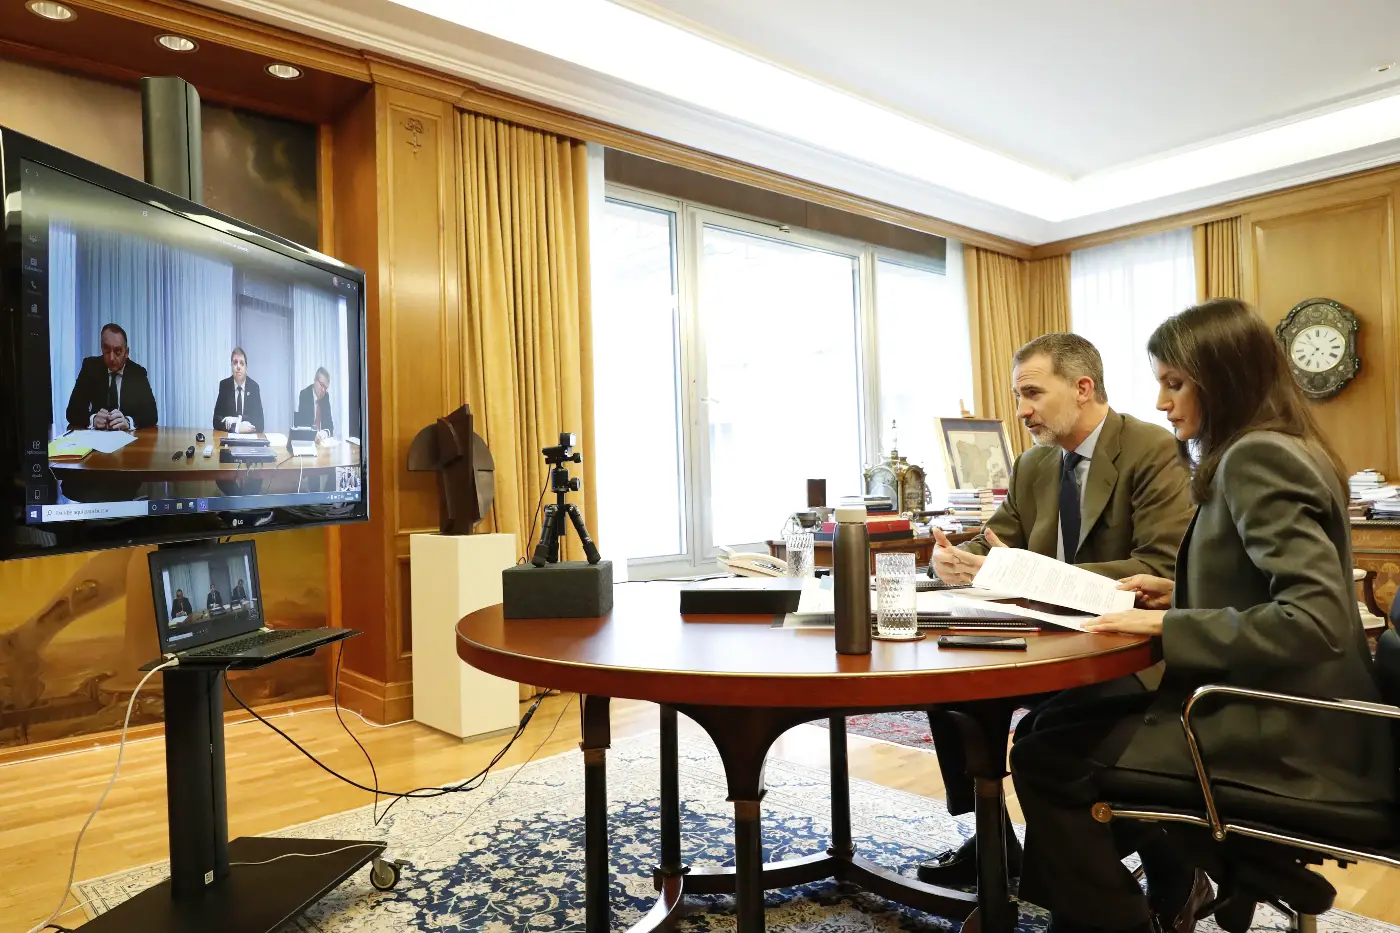 Letizia joined King Felipe for a videoconference with the heads of the Correos y Telégrafos State Society